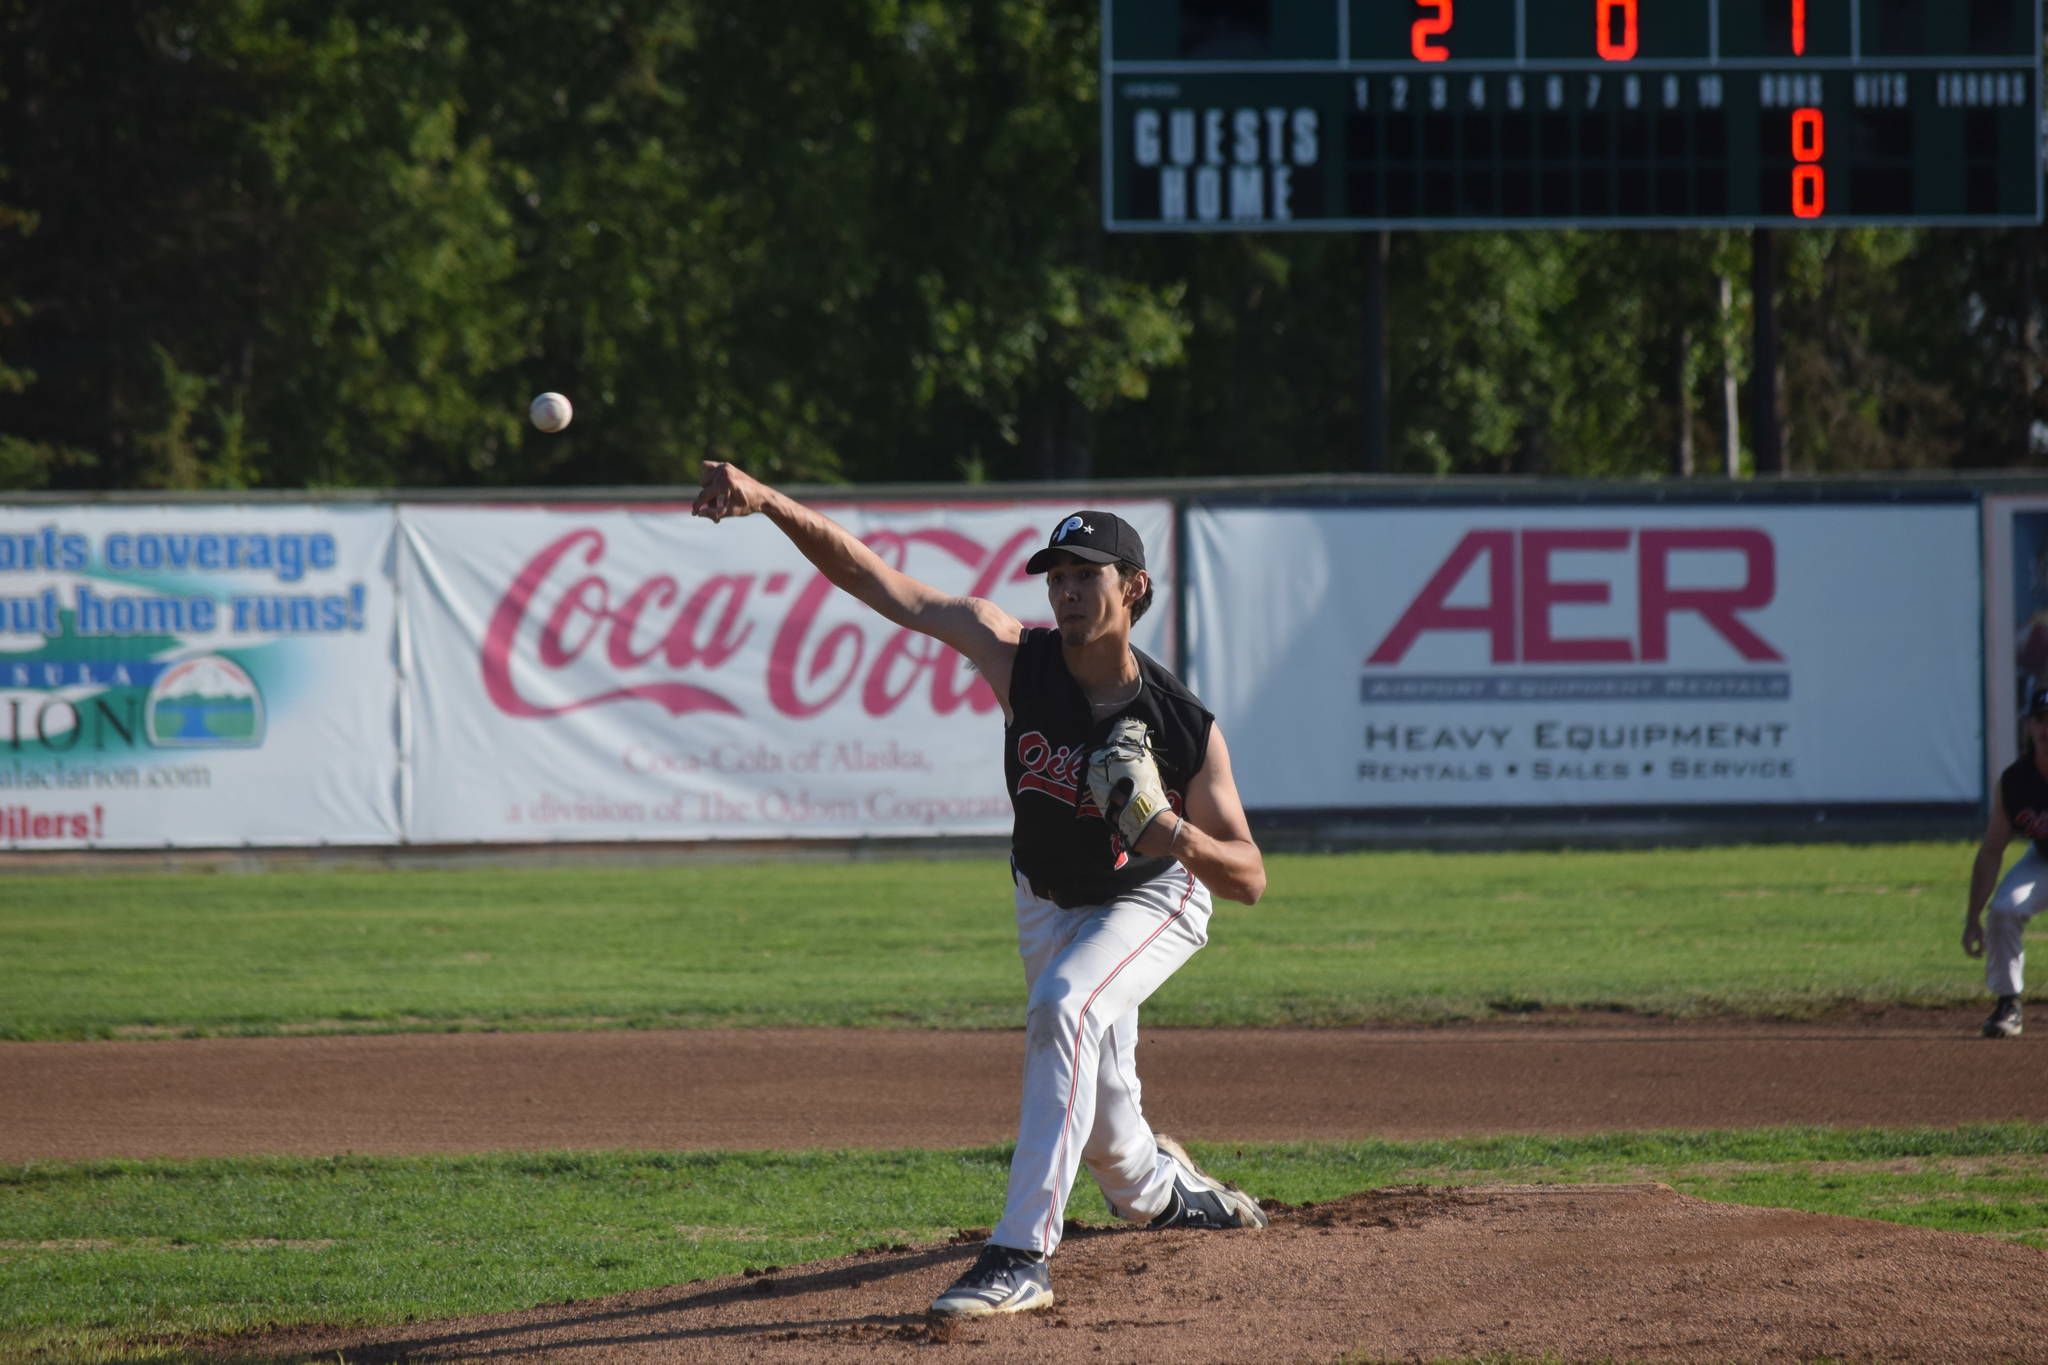 Oilers pitcher Liam Rocha fires off a pitch during the team’s home game against the Chugiak Chinooks on July 13, 2021, at Coral Seymour Memorial Ball Park in Kenai, Alaska. (Camille Botello / Peninsula Clarion)